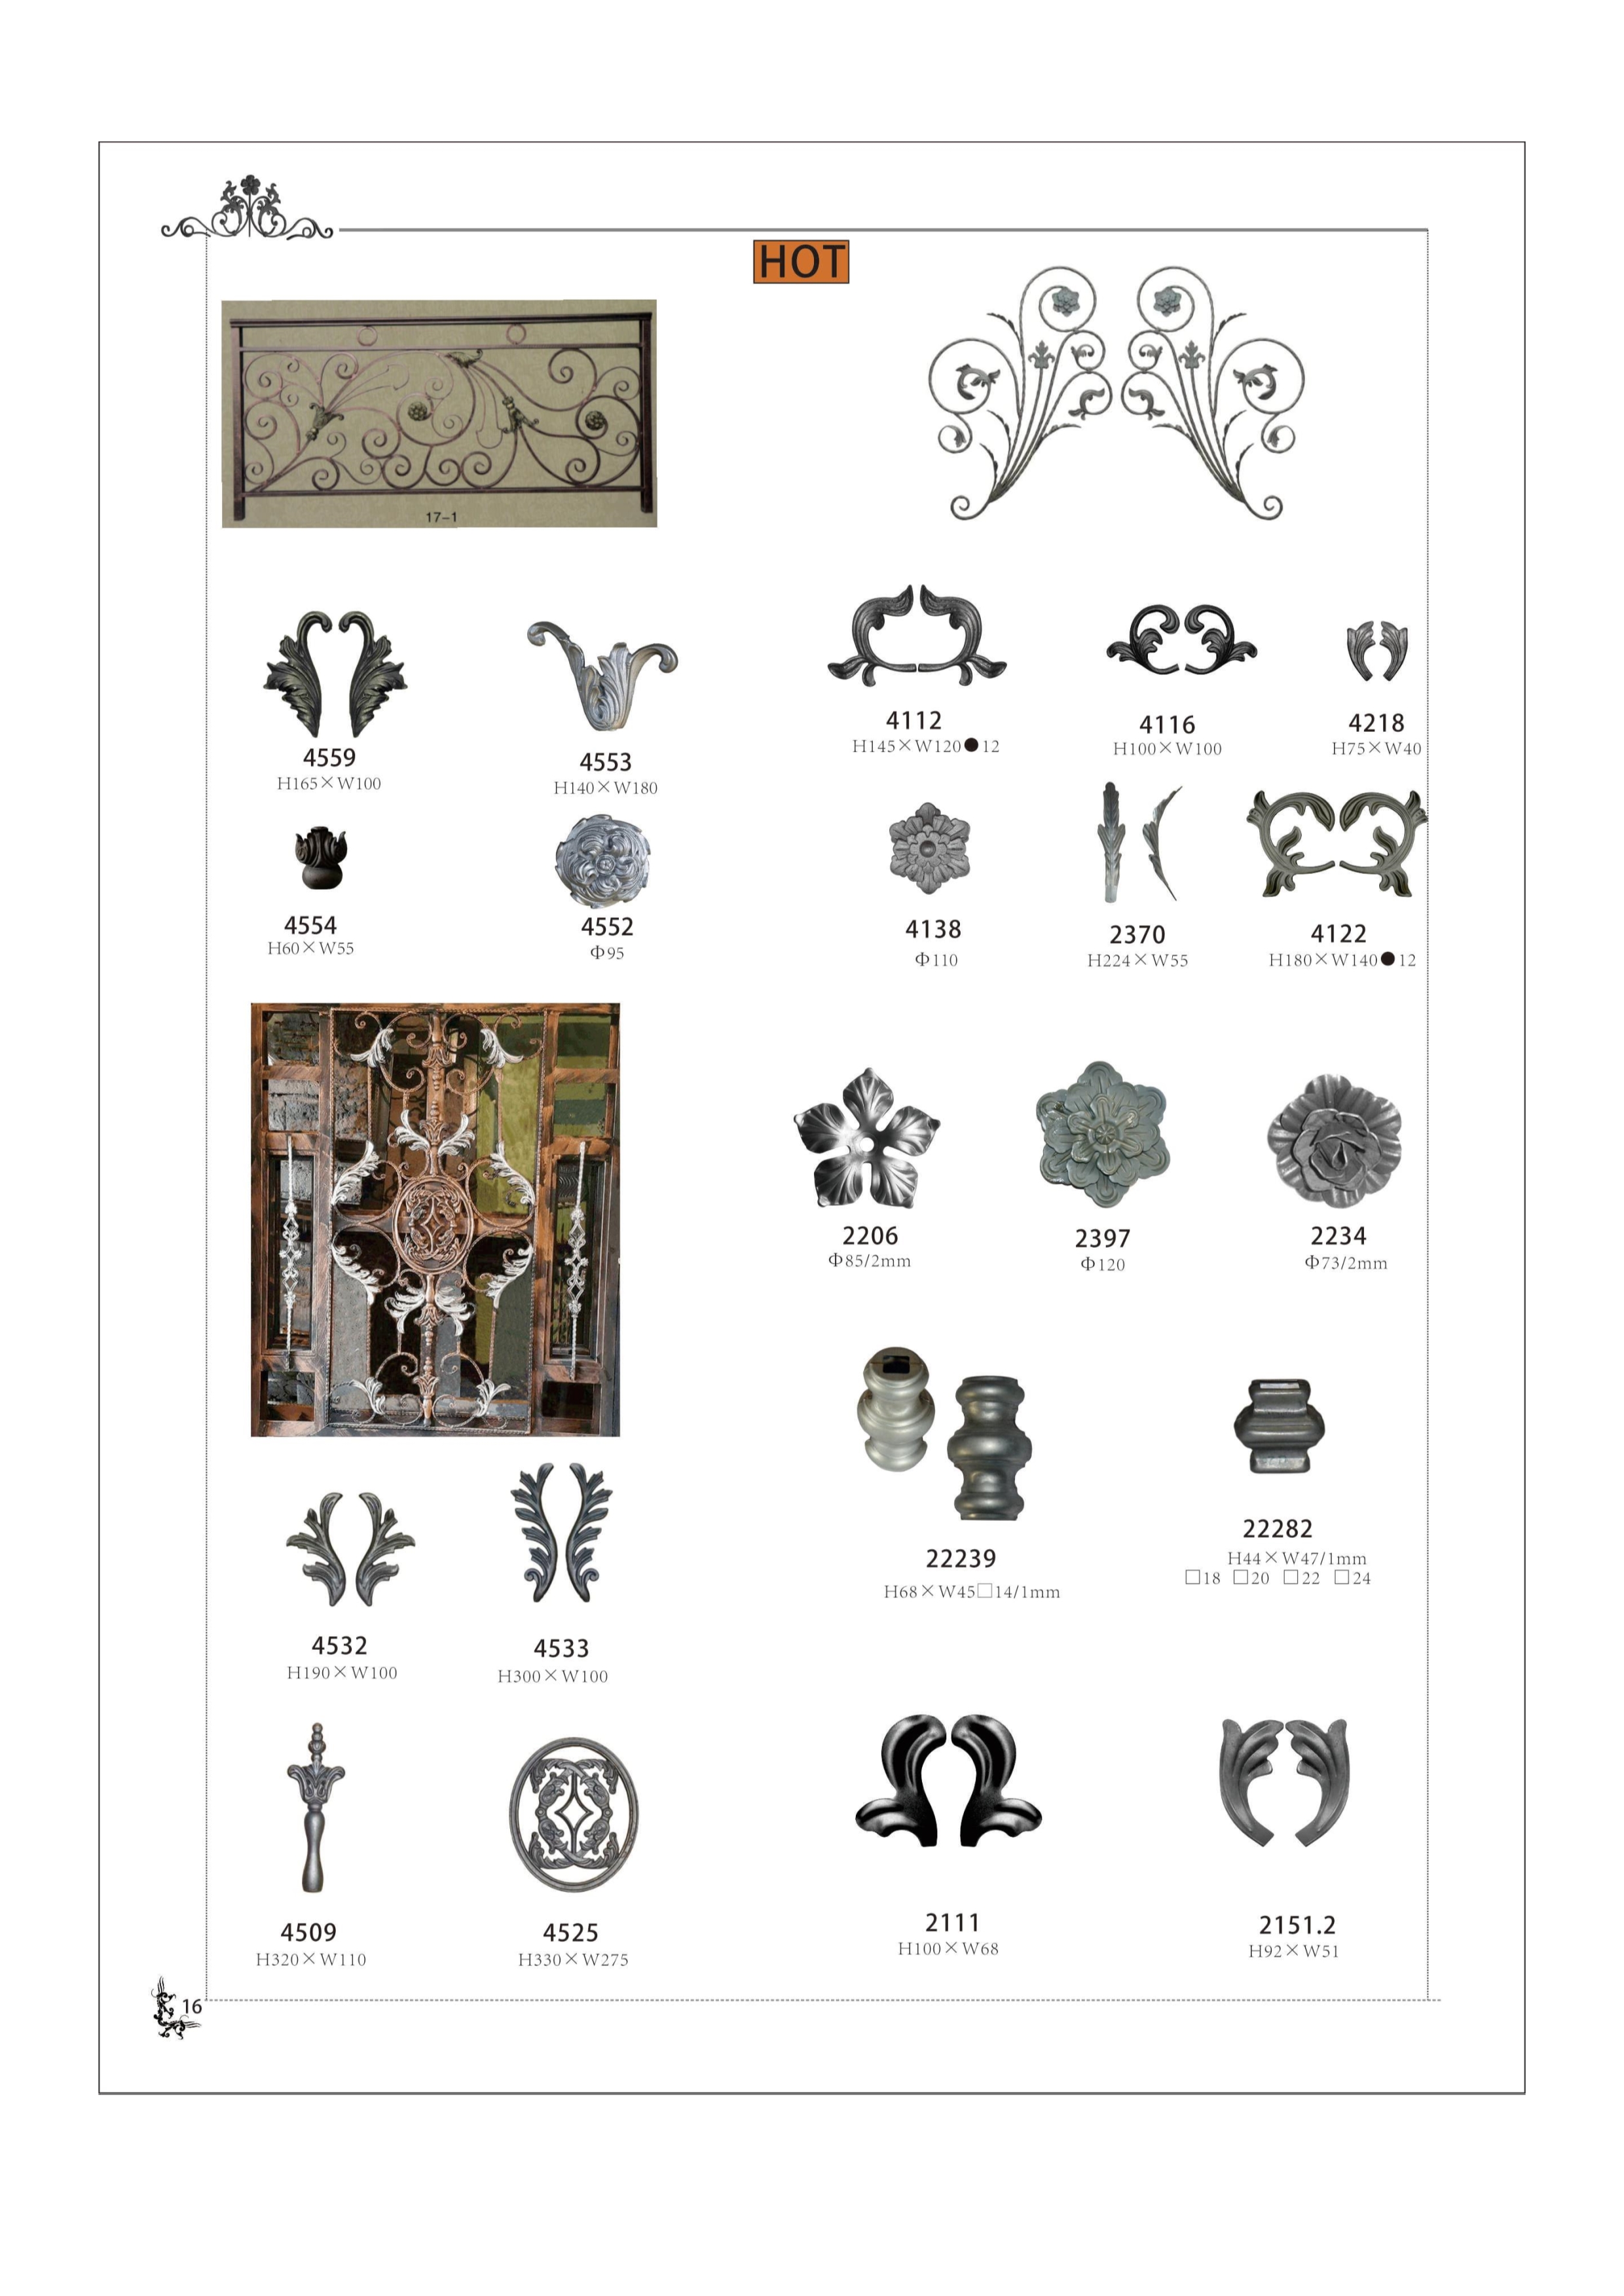 stamping ornaments Featured Image